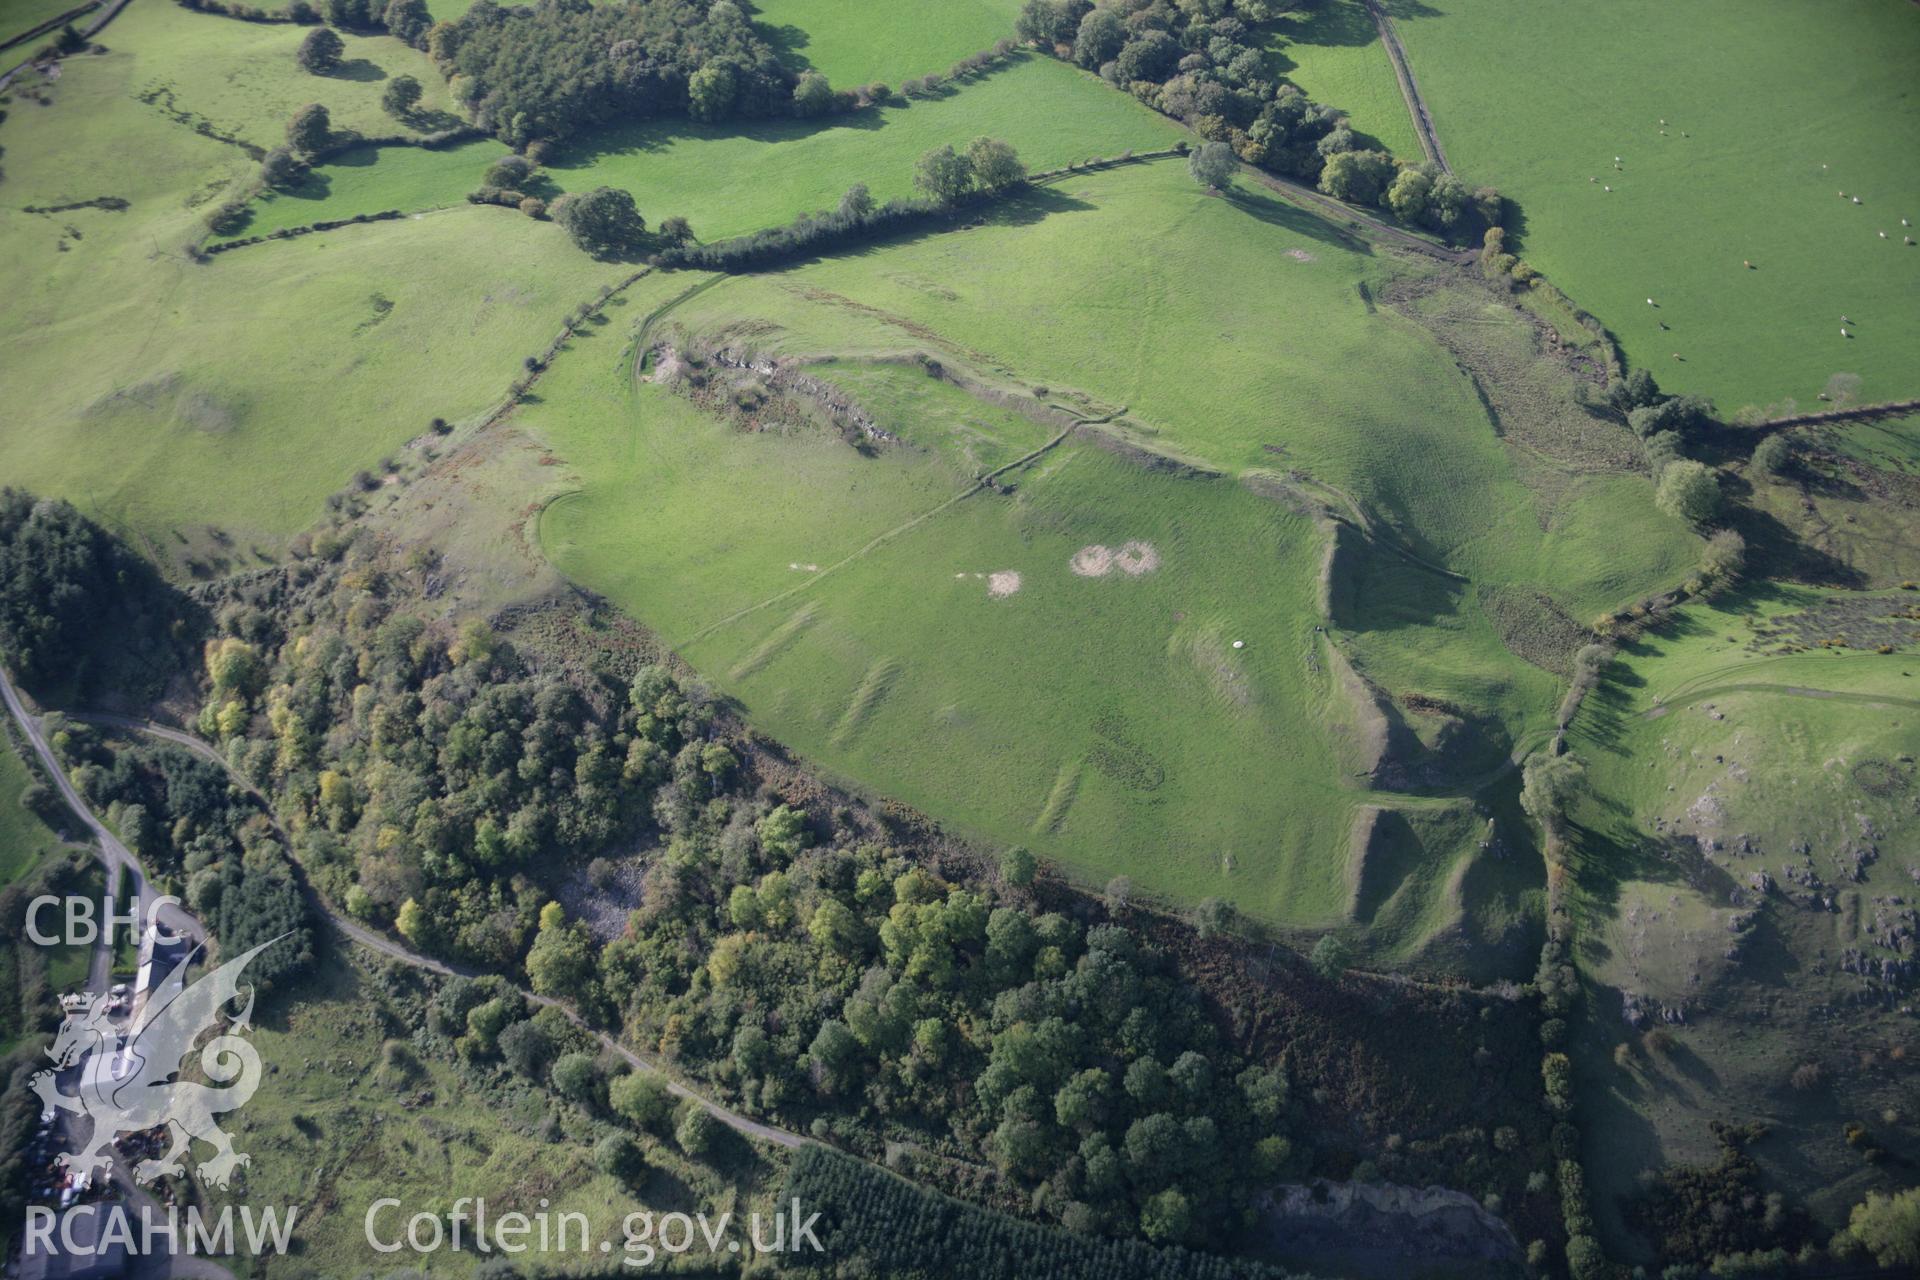 RCAHMW colour oblique aerial photograph of Graig Fawr Camp from the east with pillow mounds visible. Taken on 13 October 2005 by Toby Driver